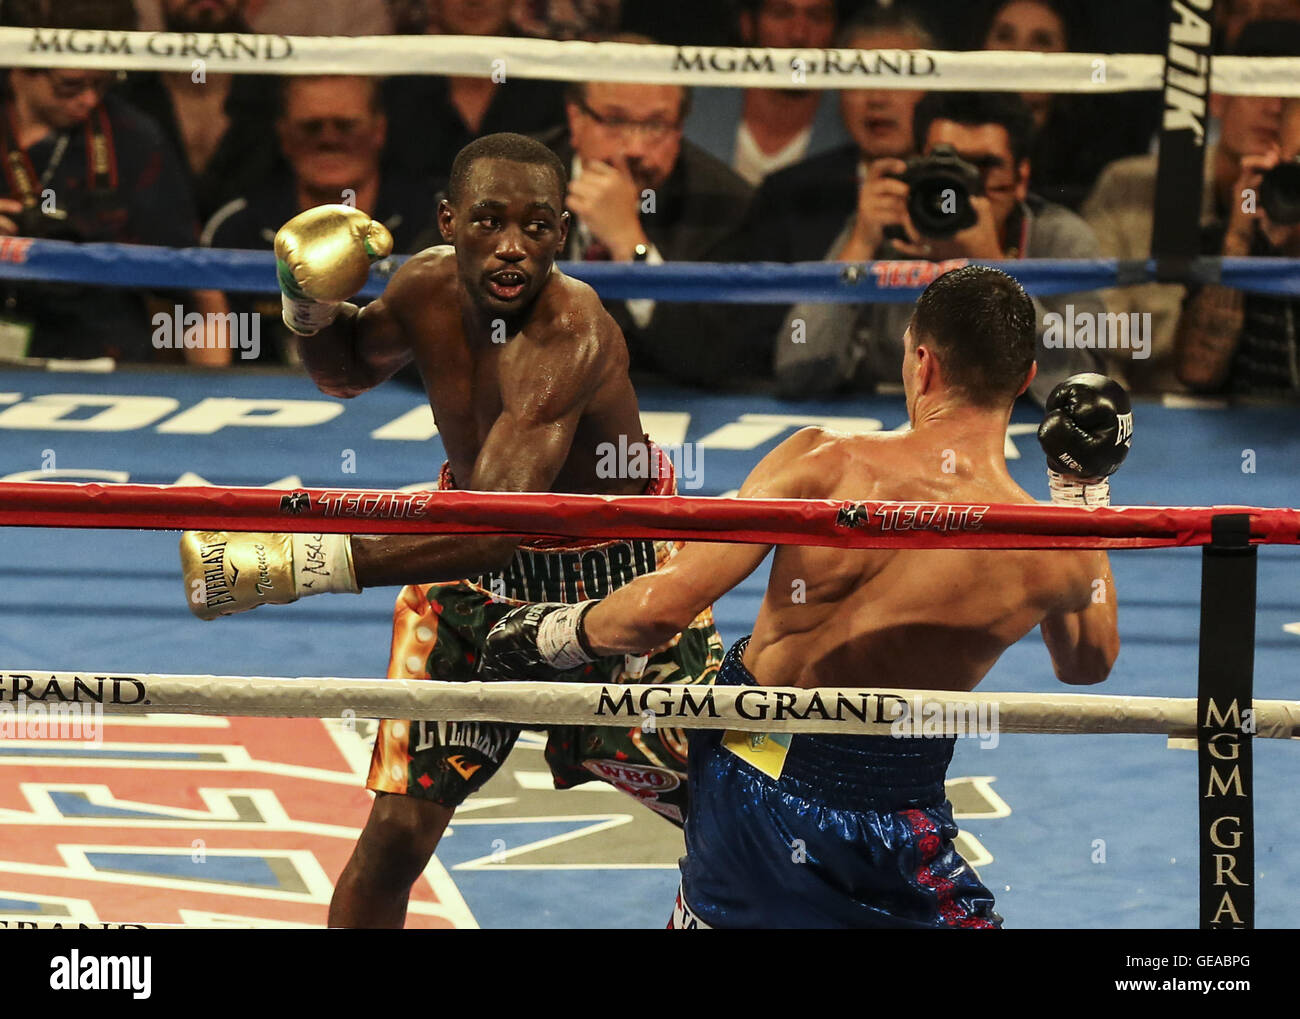 Las Vegas, Nevada, USA. 23rd July, 2016. Terence Crawford fights against Viktor Postol during the vacant WBC-WBO junior welterweight title boxing match at the MGM Grand Garden Arena on July 23, 2016 in Las Vegas, Nevada. © Ringo Chiu/ZUMA Wire/Alamy Live News Stock Photo